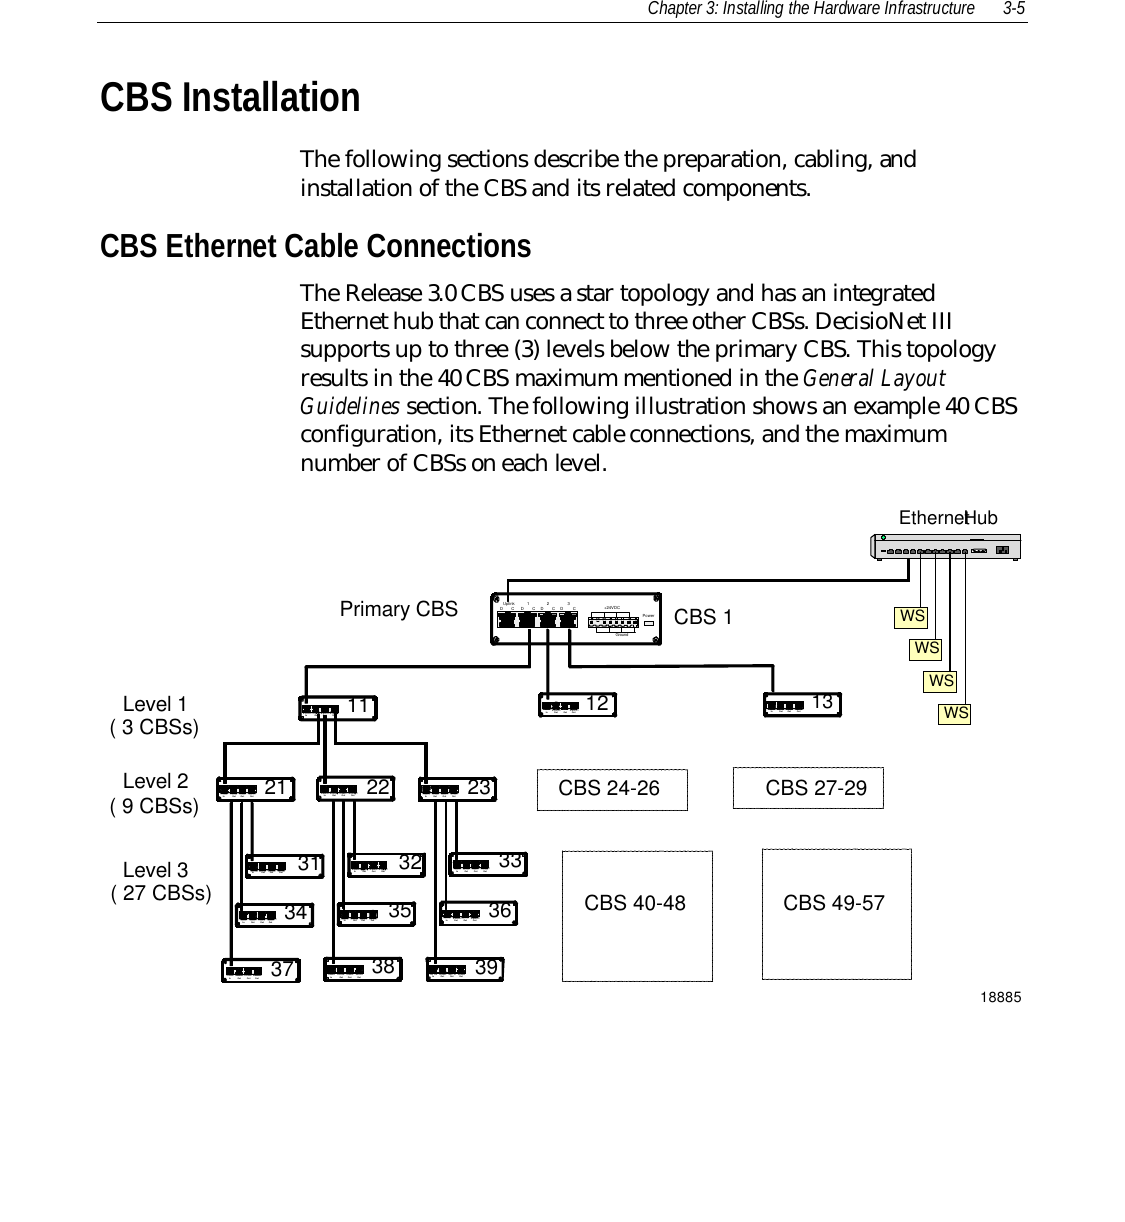 Chapter 3: Installing the Hardware Infrastructure 3-5CBS Installation The following sections describe the preparation, cabling, andinstallation of the CBS and its related components.CBS Ethernet Cable ConnectionsThe Release 3.0 CBS uses a star topology and has an integratedEthernet hub that can connect to three other CBSs. DecisioNet IIIsupports up to three (3) levels below the primary CBS. This topologyresults in the 40 CBS maximum mentioned in the General LayoutGuidelines section. The following illustration shows an example 40 CBSconfiguration, its Ethernet cable connections, and the maximumnumber of CBSs on each level.Ethernet HubWSWSWSWSLevel 1Level 2Level 3Primary CBSIn Out8765432187654321 8765432187654321Out Out In Out8765432187654321 8765432187654321Out Out In Out8765432187654321 8765432187654321Out OutIn Out8765432187654321 8765432187654321Out OutIn Out8765432187654321 8765432187654321Out Out In Out8765432187654321 8765432187654321Out OutIn Out8765432187654321 8765432187654321Out OutIn Out8765432187654321 8765432187654321Out OutIn Out8765432187654321 8765432187654321Out OutIn Out8765432187654321 8765432187654321Out OutIn Out8765432187654321 8765432187654321Out OutIn Out8765432187654321 8765432187654321Out OutIn Out8765432187654321 8765432187654321Out OutIn Out8765432187654321 8765432187654321Out OutIn Out8765432187654321 8765432187654321Out Out( 3 CBSs)( 9 CBSs)( 27 CBSs)CBS 24-26CBS 1CBS 27-29CBS 40-48 CBS 49-5711 12 1321 22 2331 32 3334 35 3637 38 3918885PowerUplinkD DDDCCCC12 3Ground+24VDC